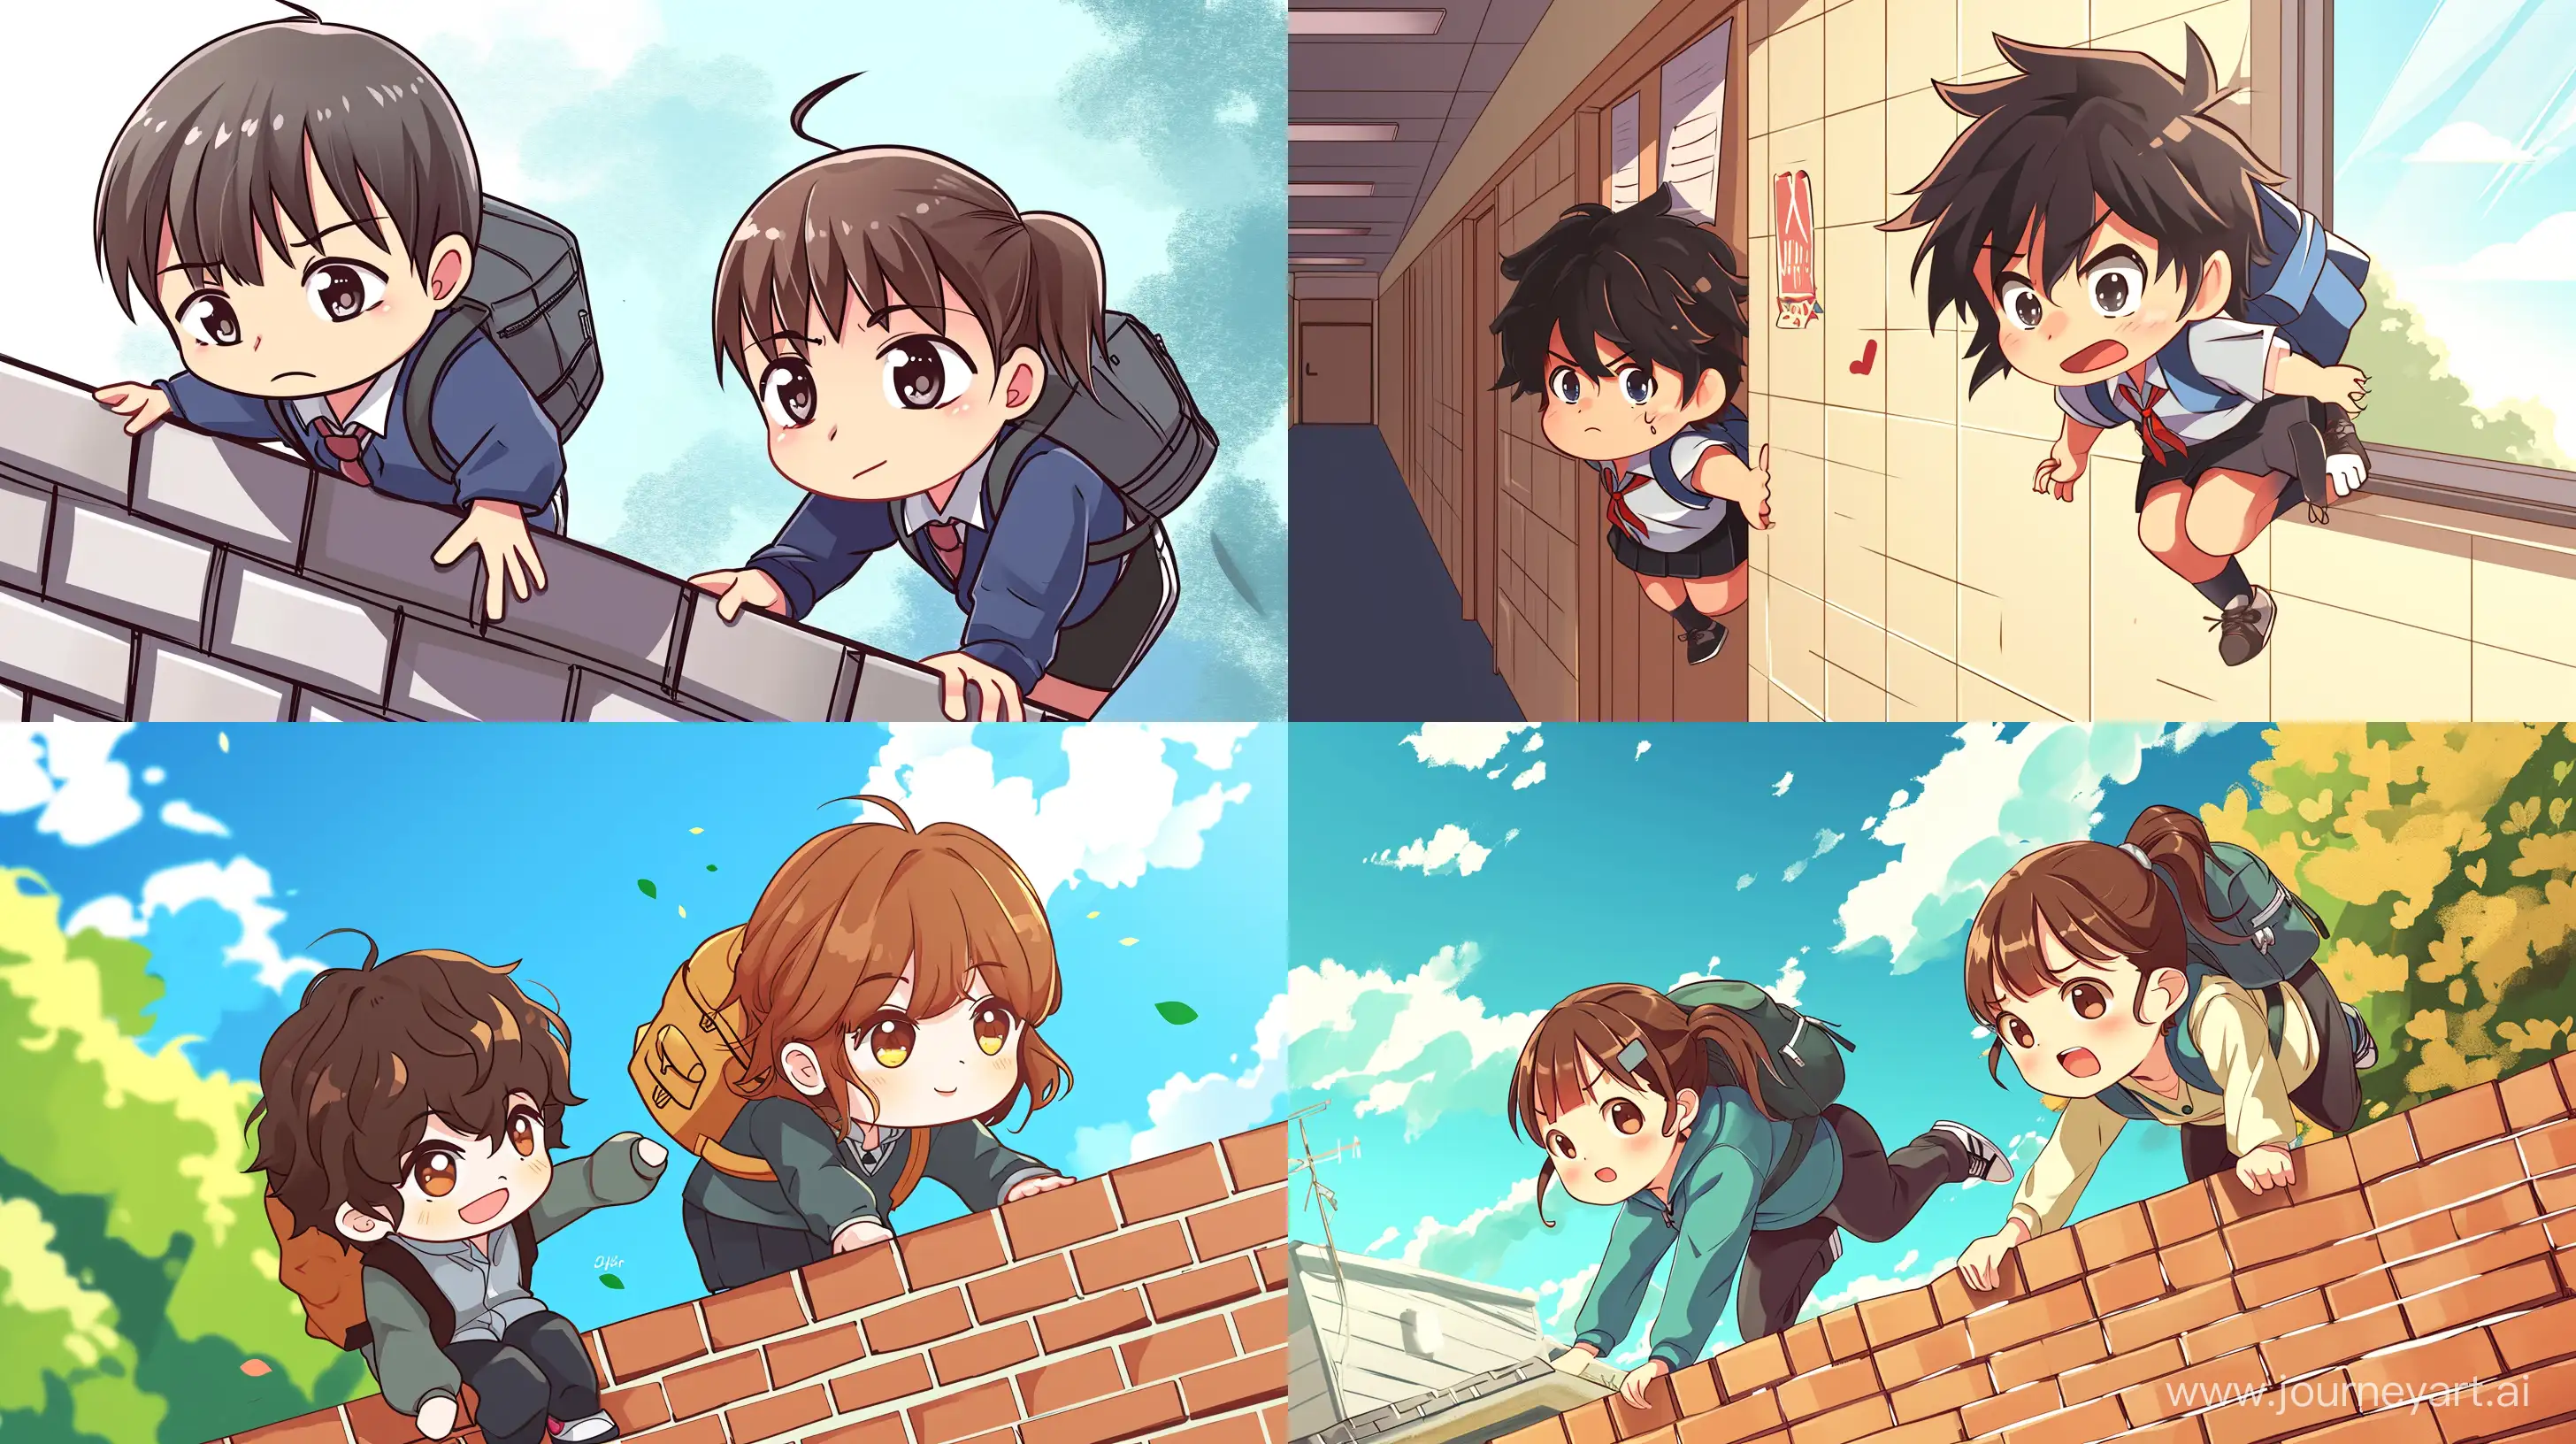 Chibi-Style-Anime-Students-Climbing-Wall-to-School